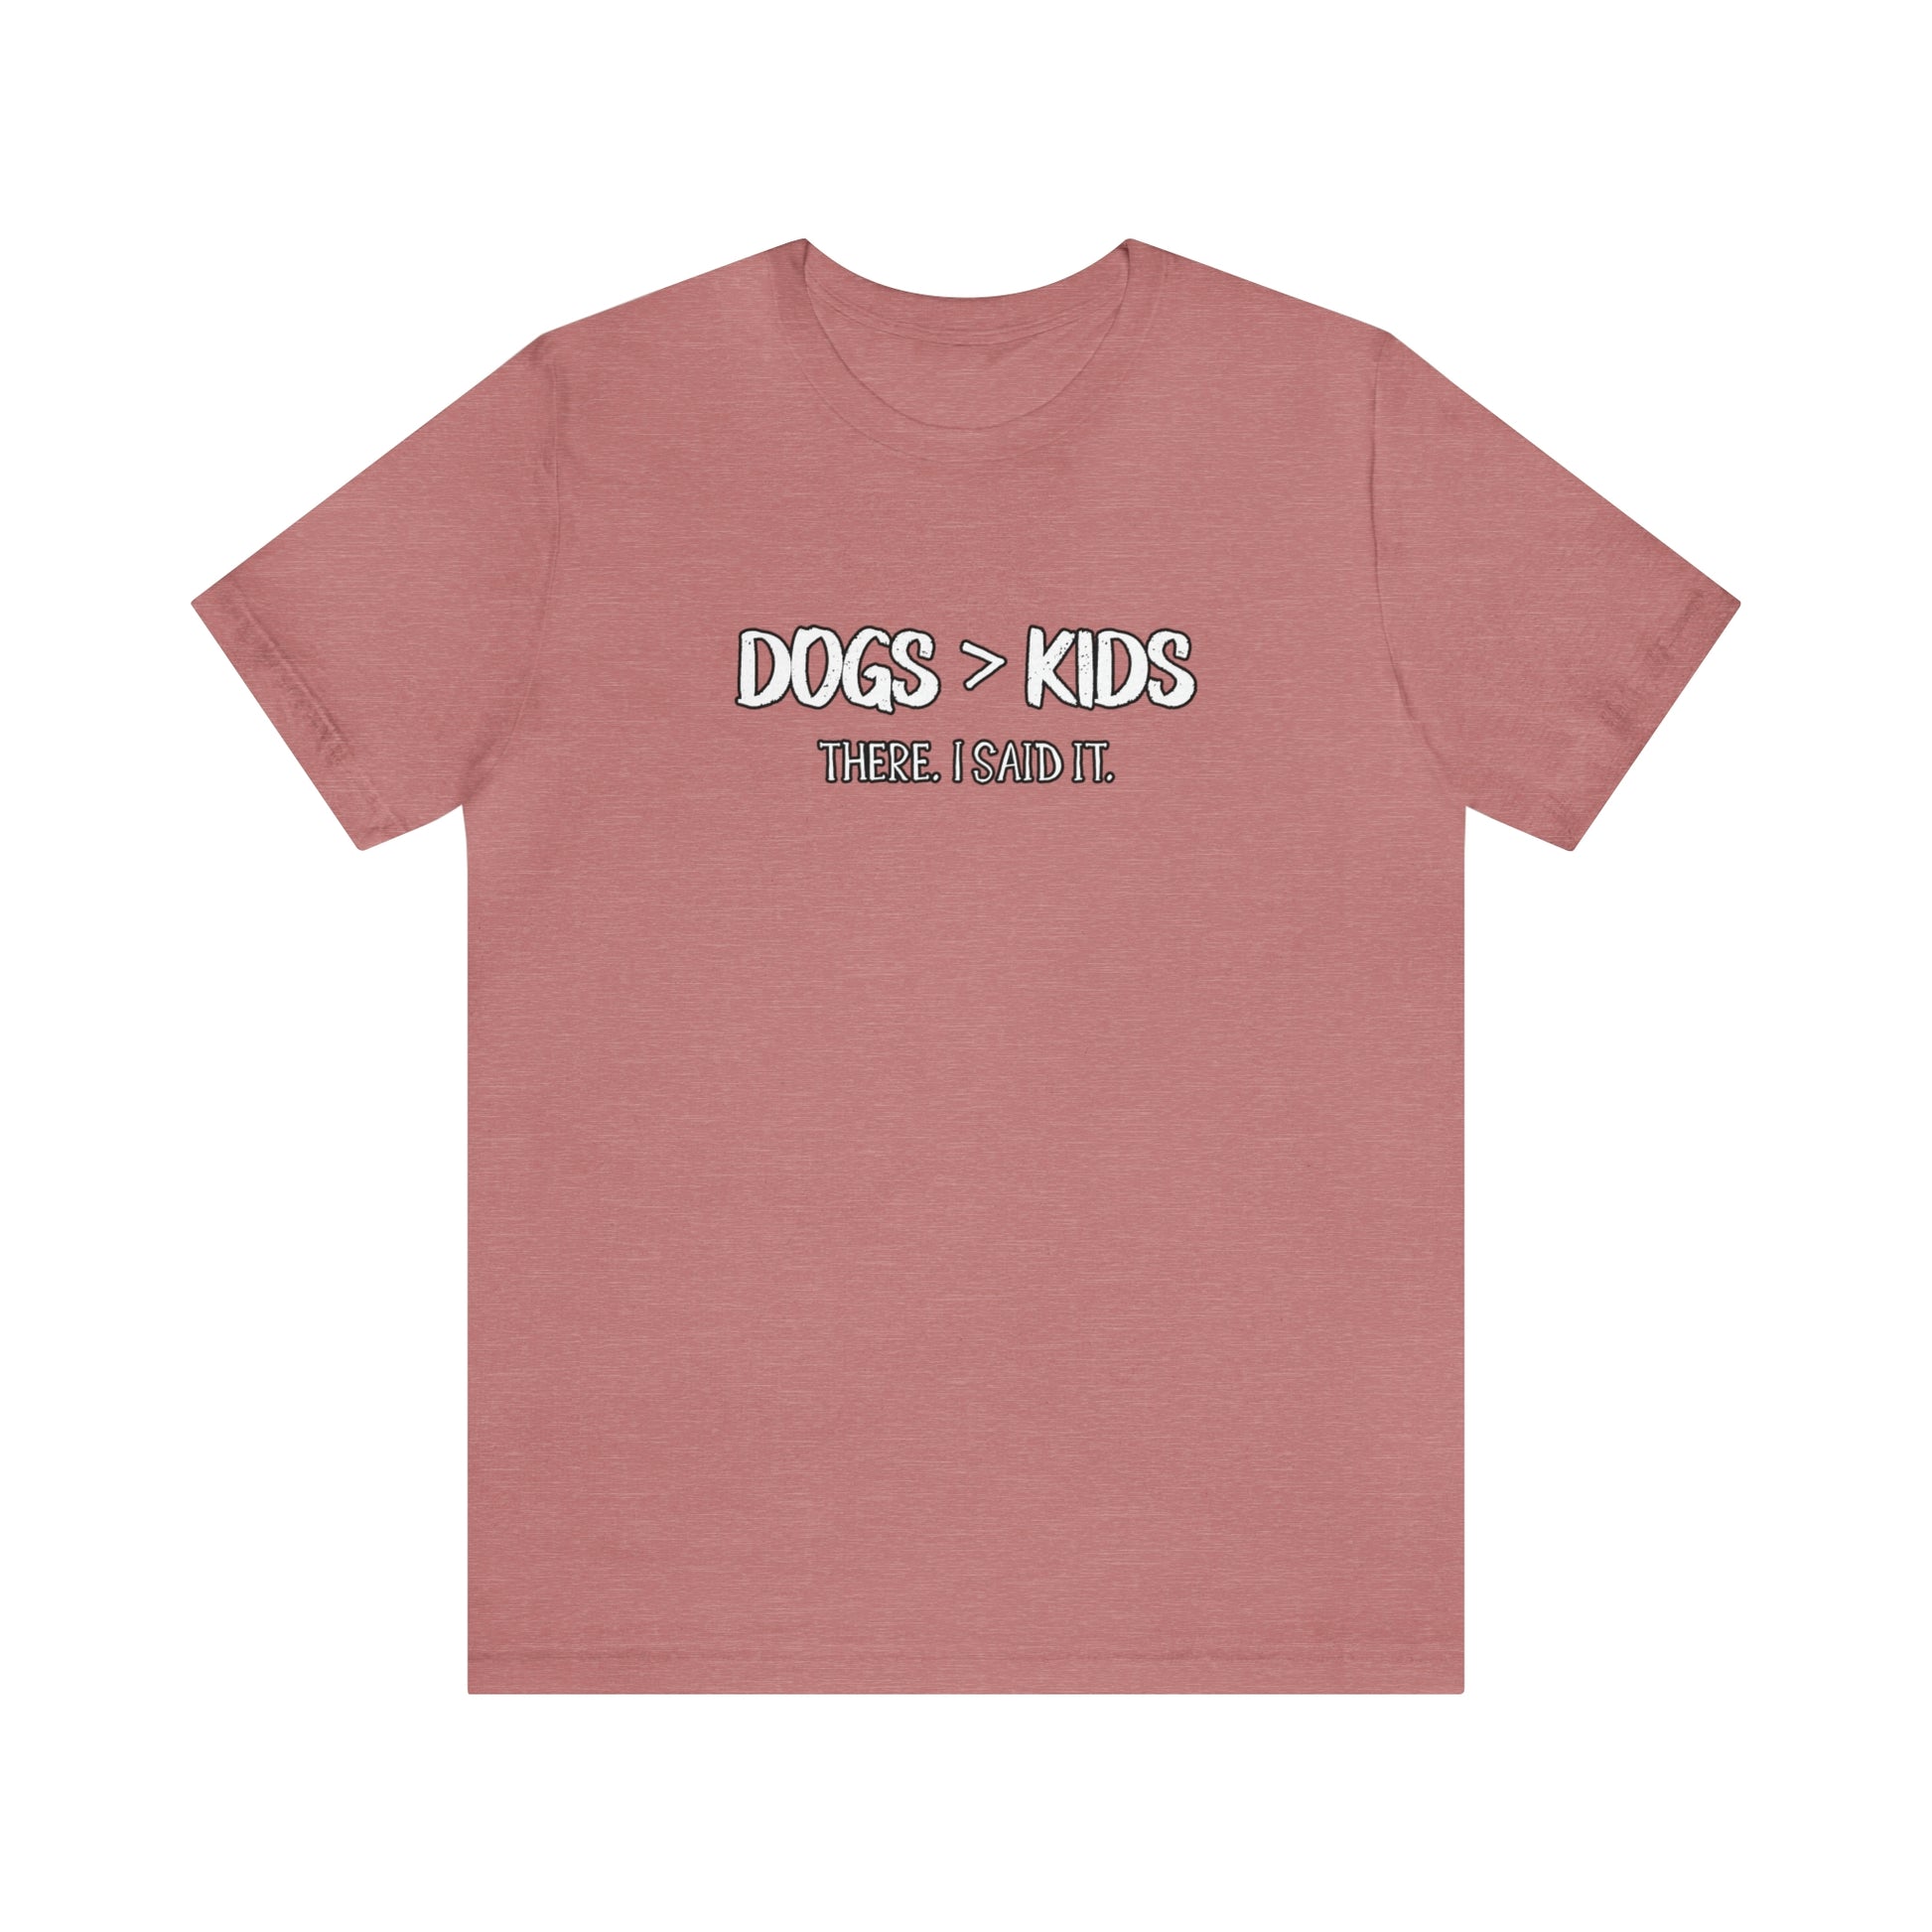 dogs are better than kids t shirt red